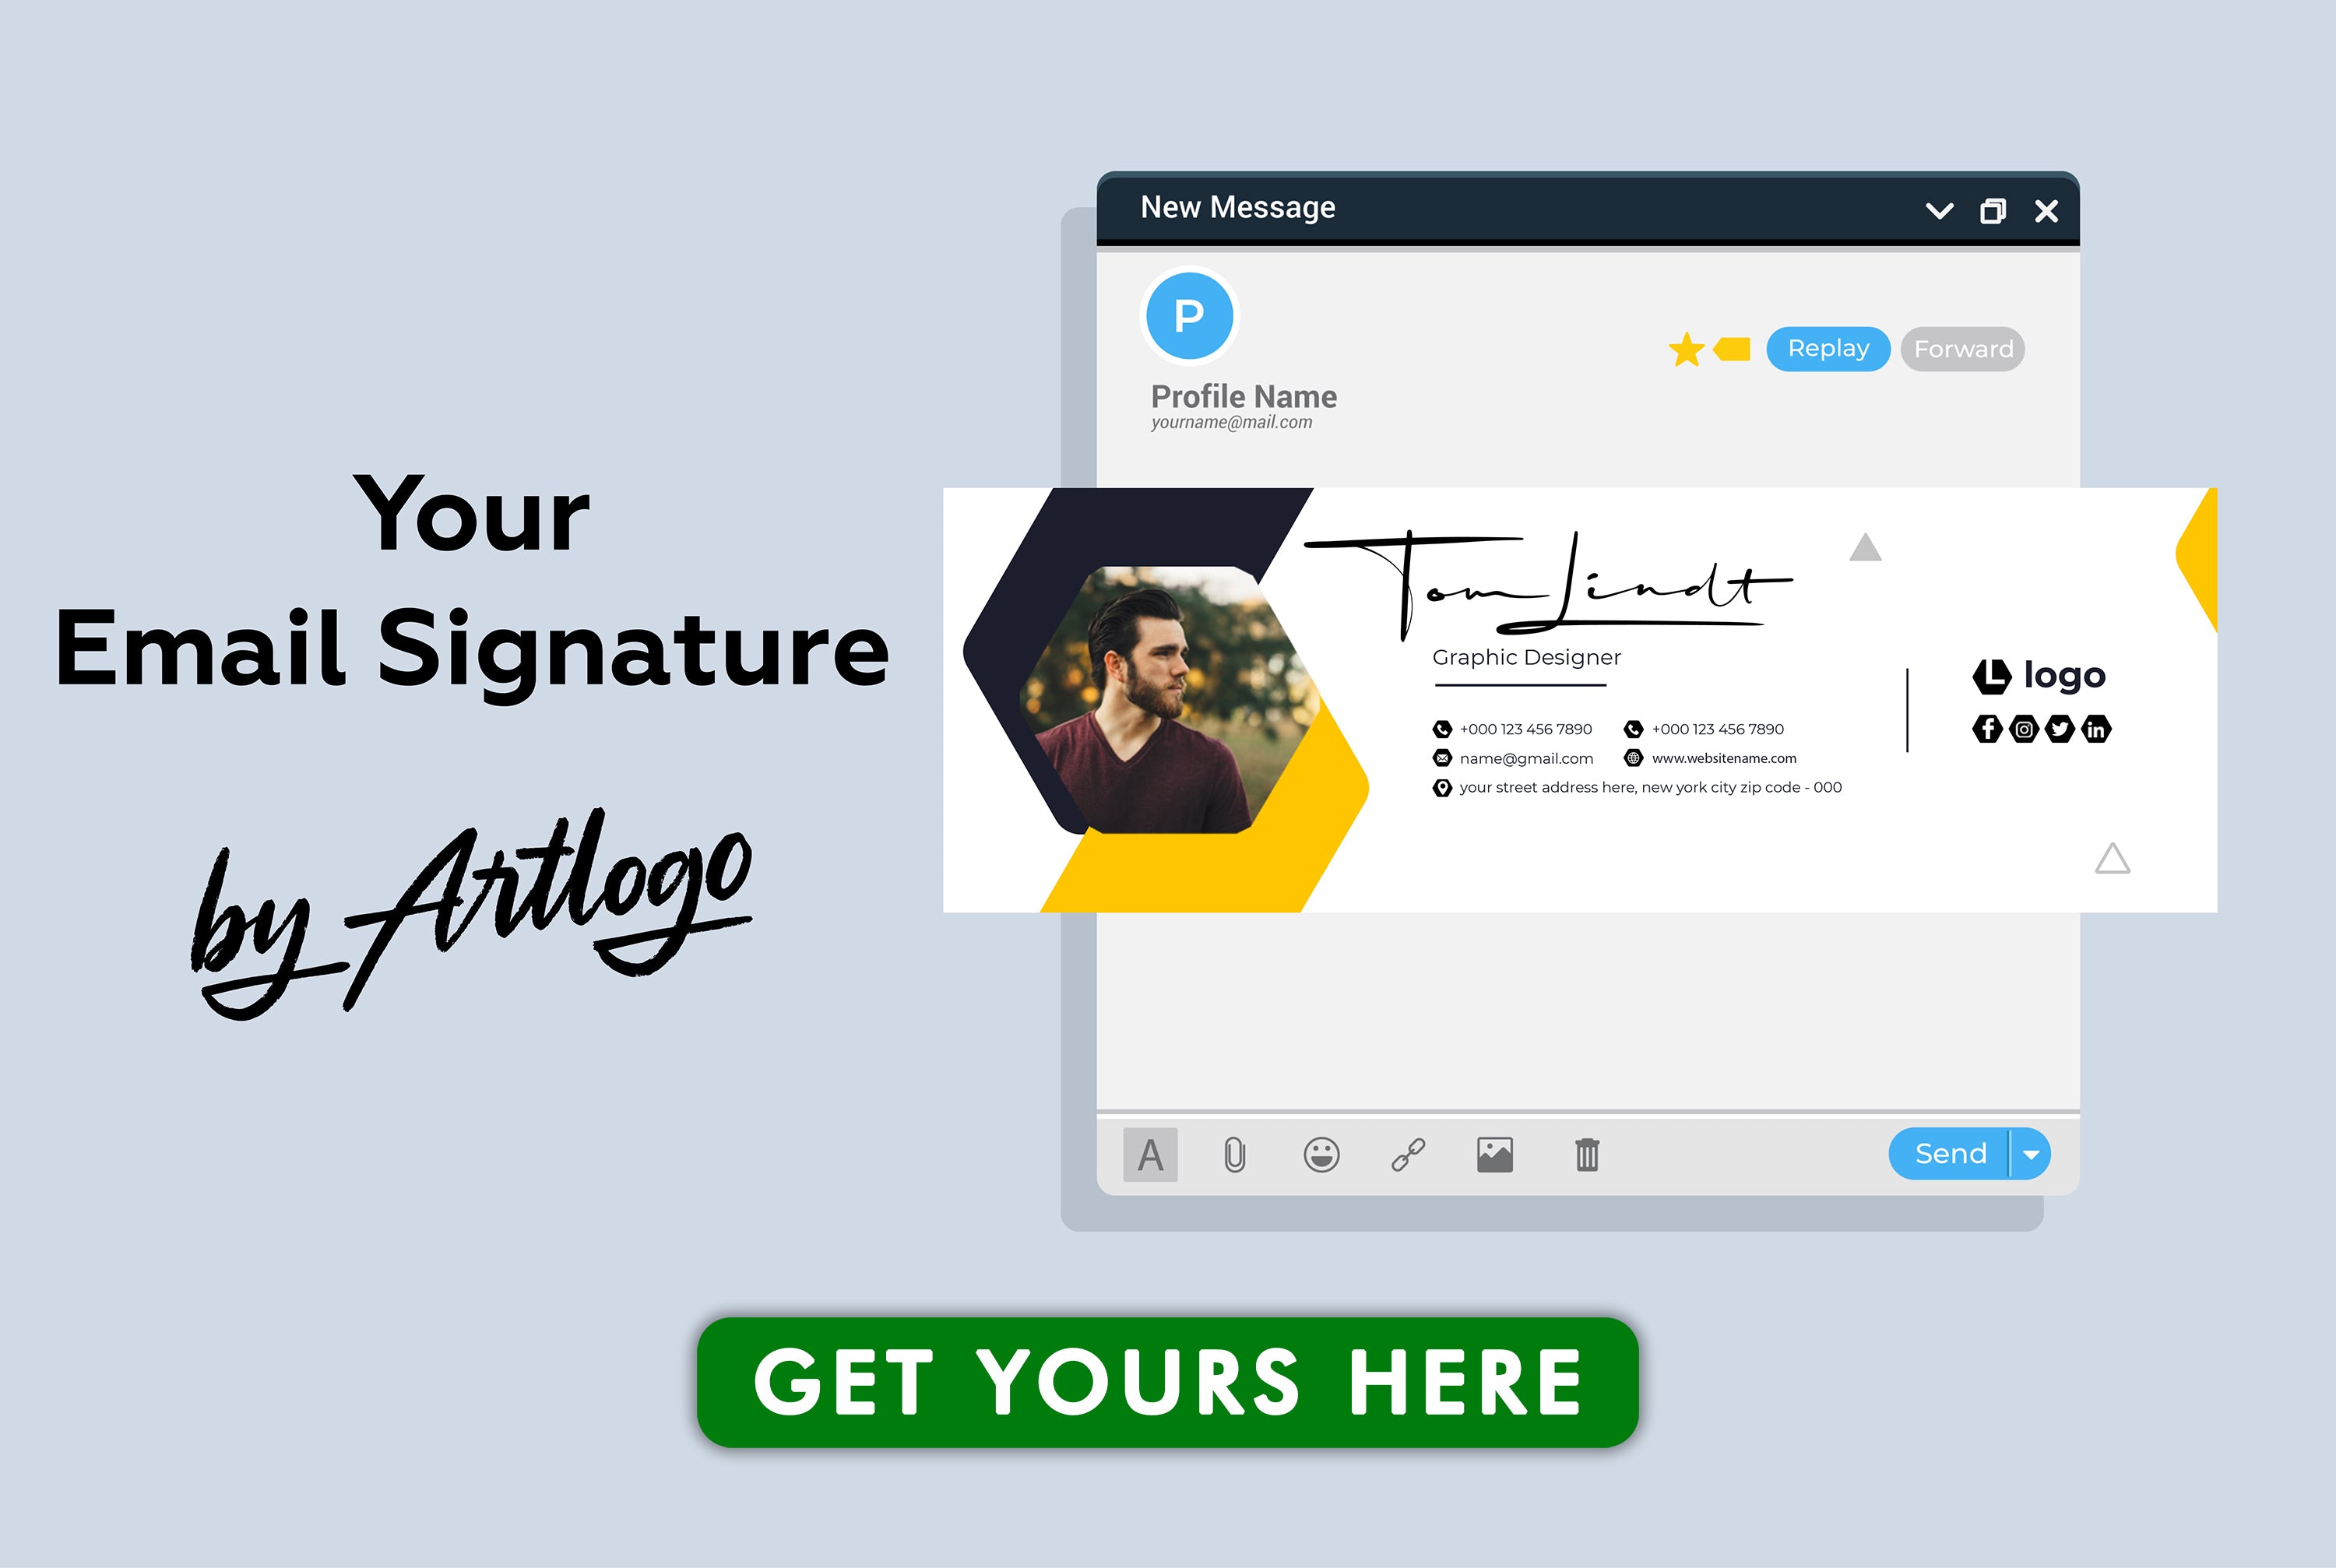 Learn how to create a standout professional email signature that reflects your professionalism and leaves a lasting impression. Learn more here!